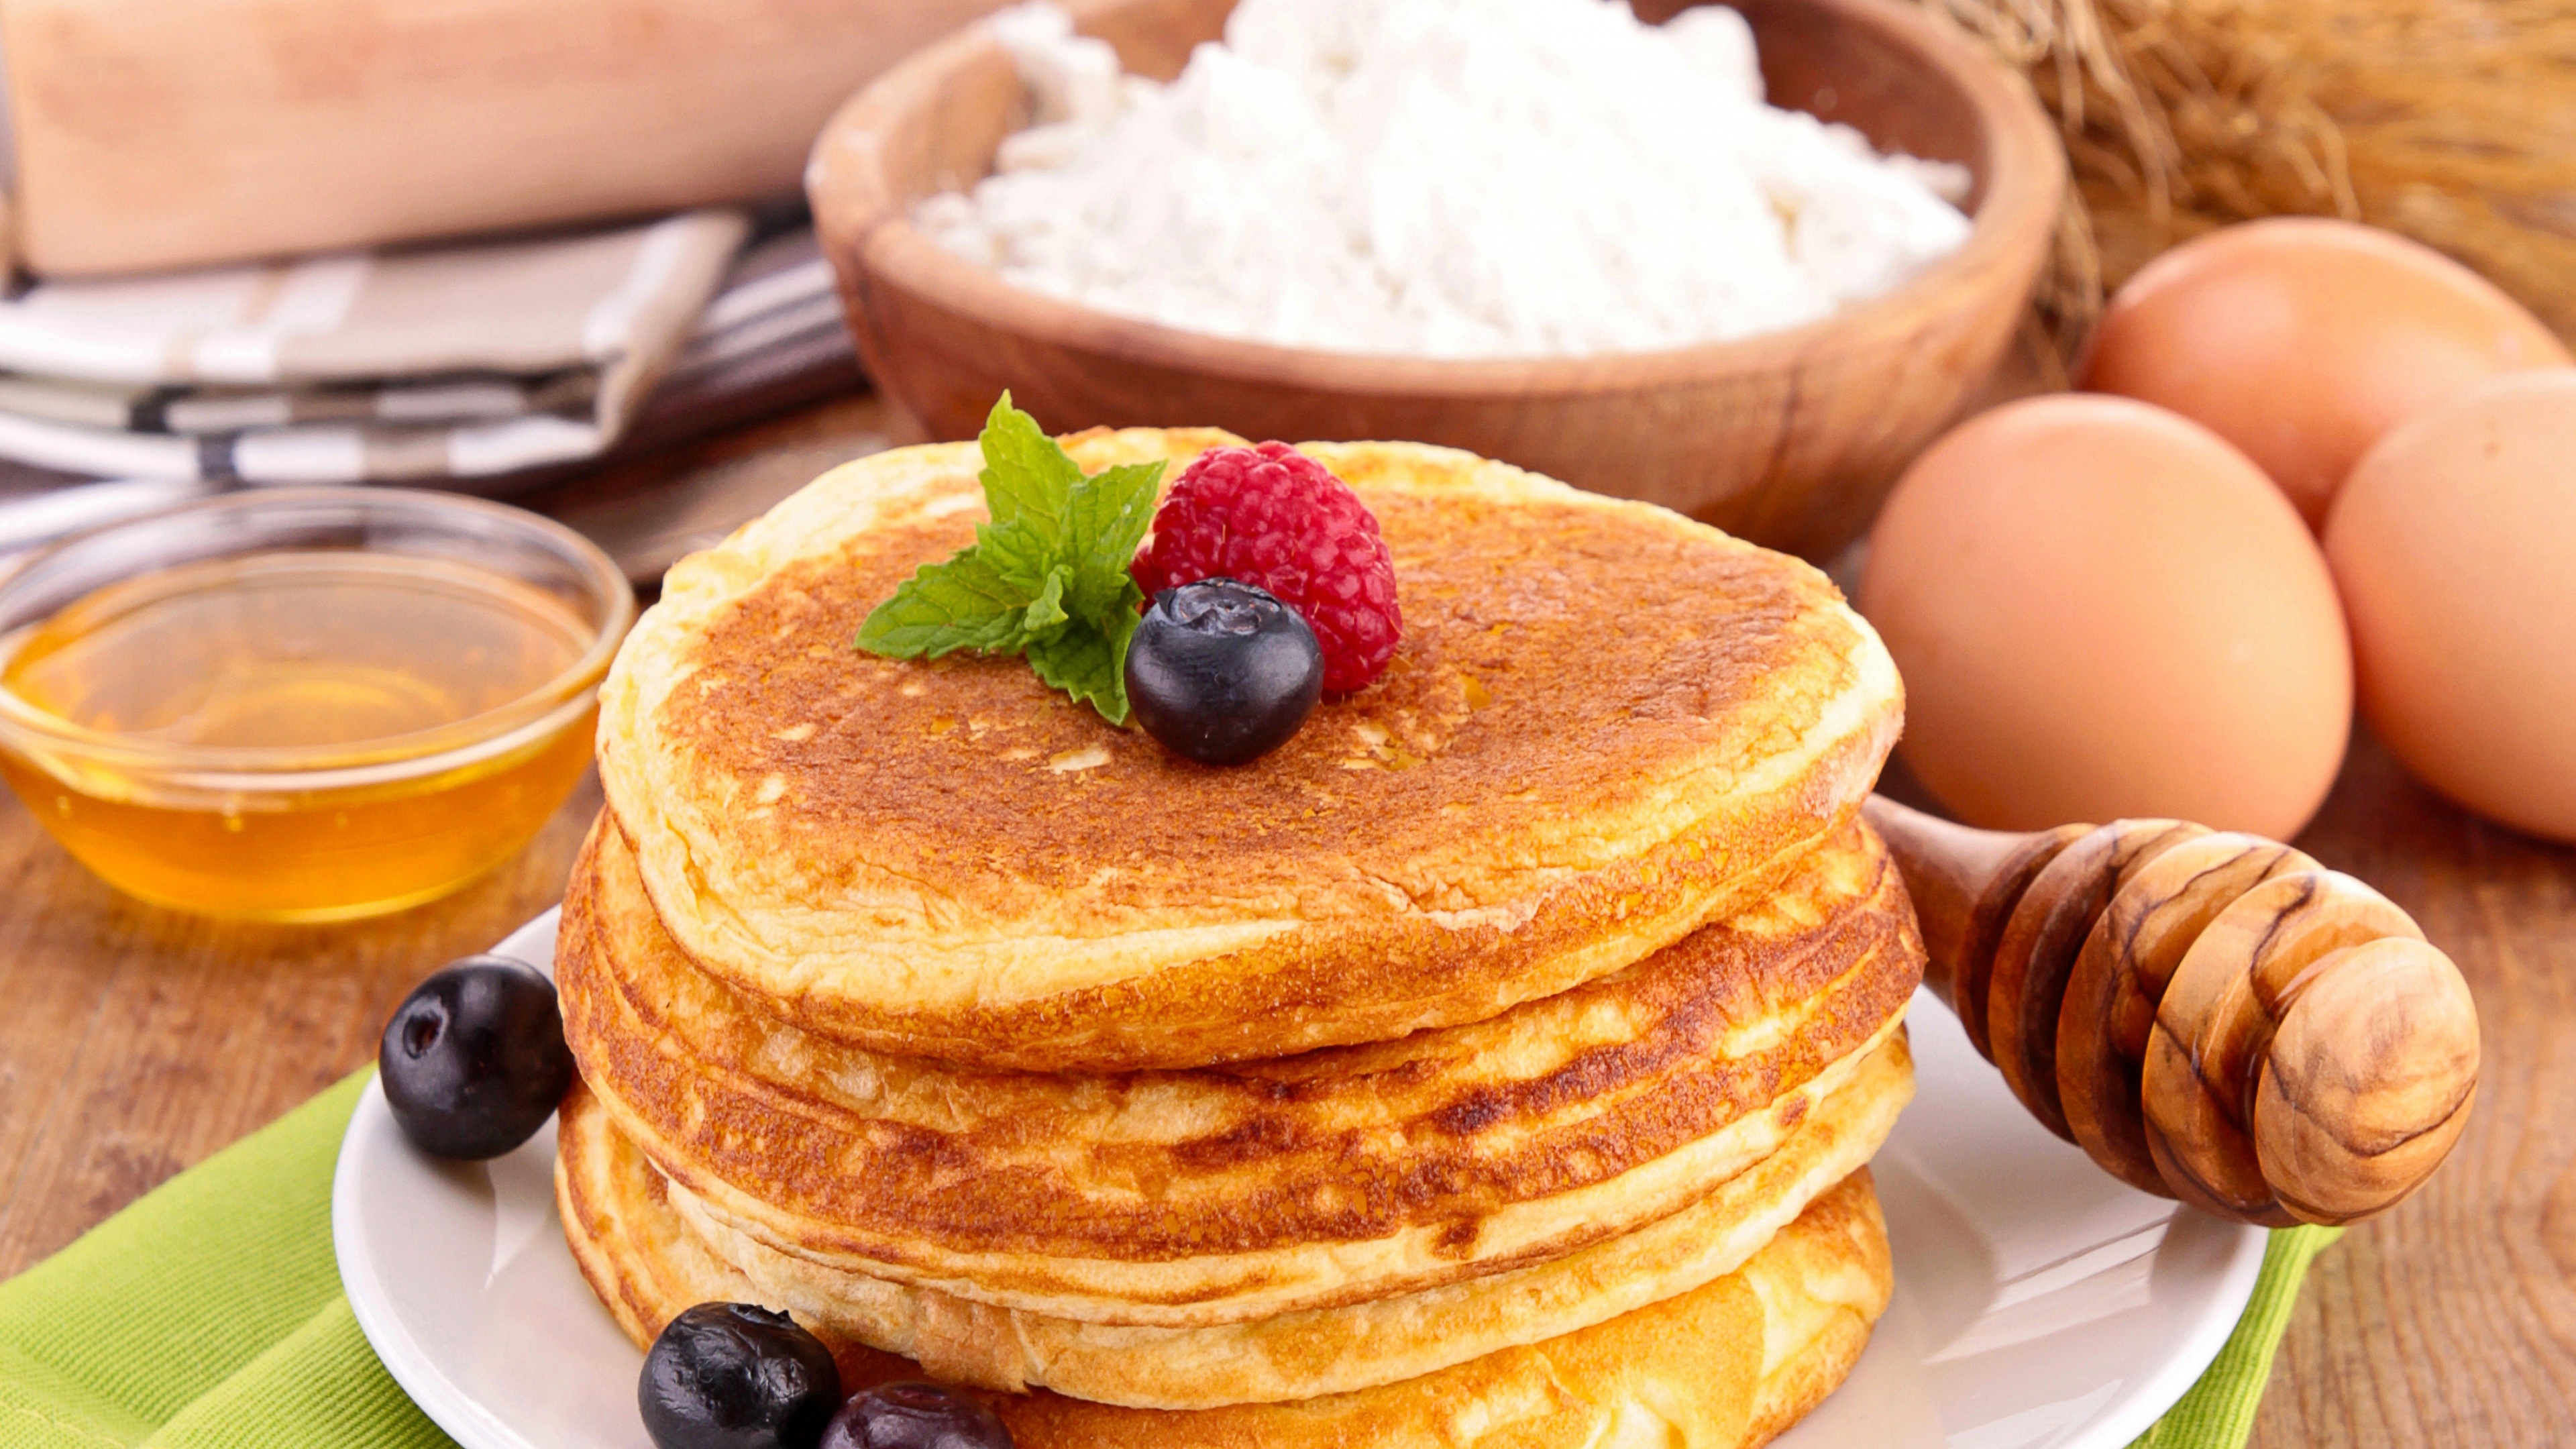 Pancake: Prepared from a starch-based batter that may contain eggs, milk, and butter. 3840x2160 4K Wallpaper.